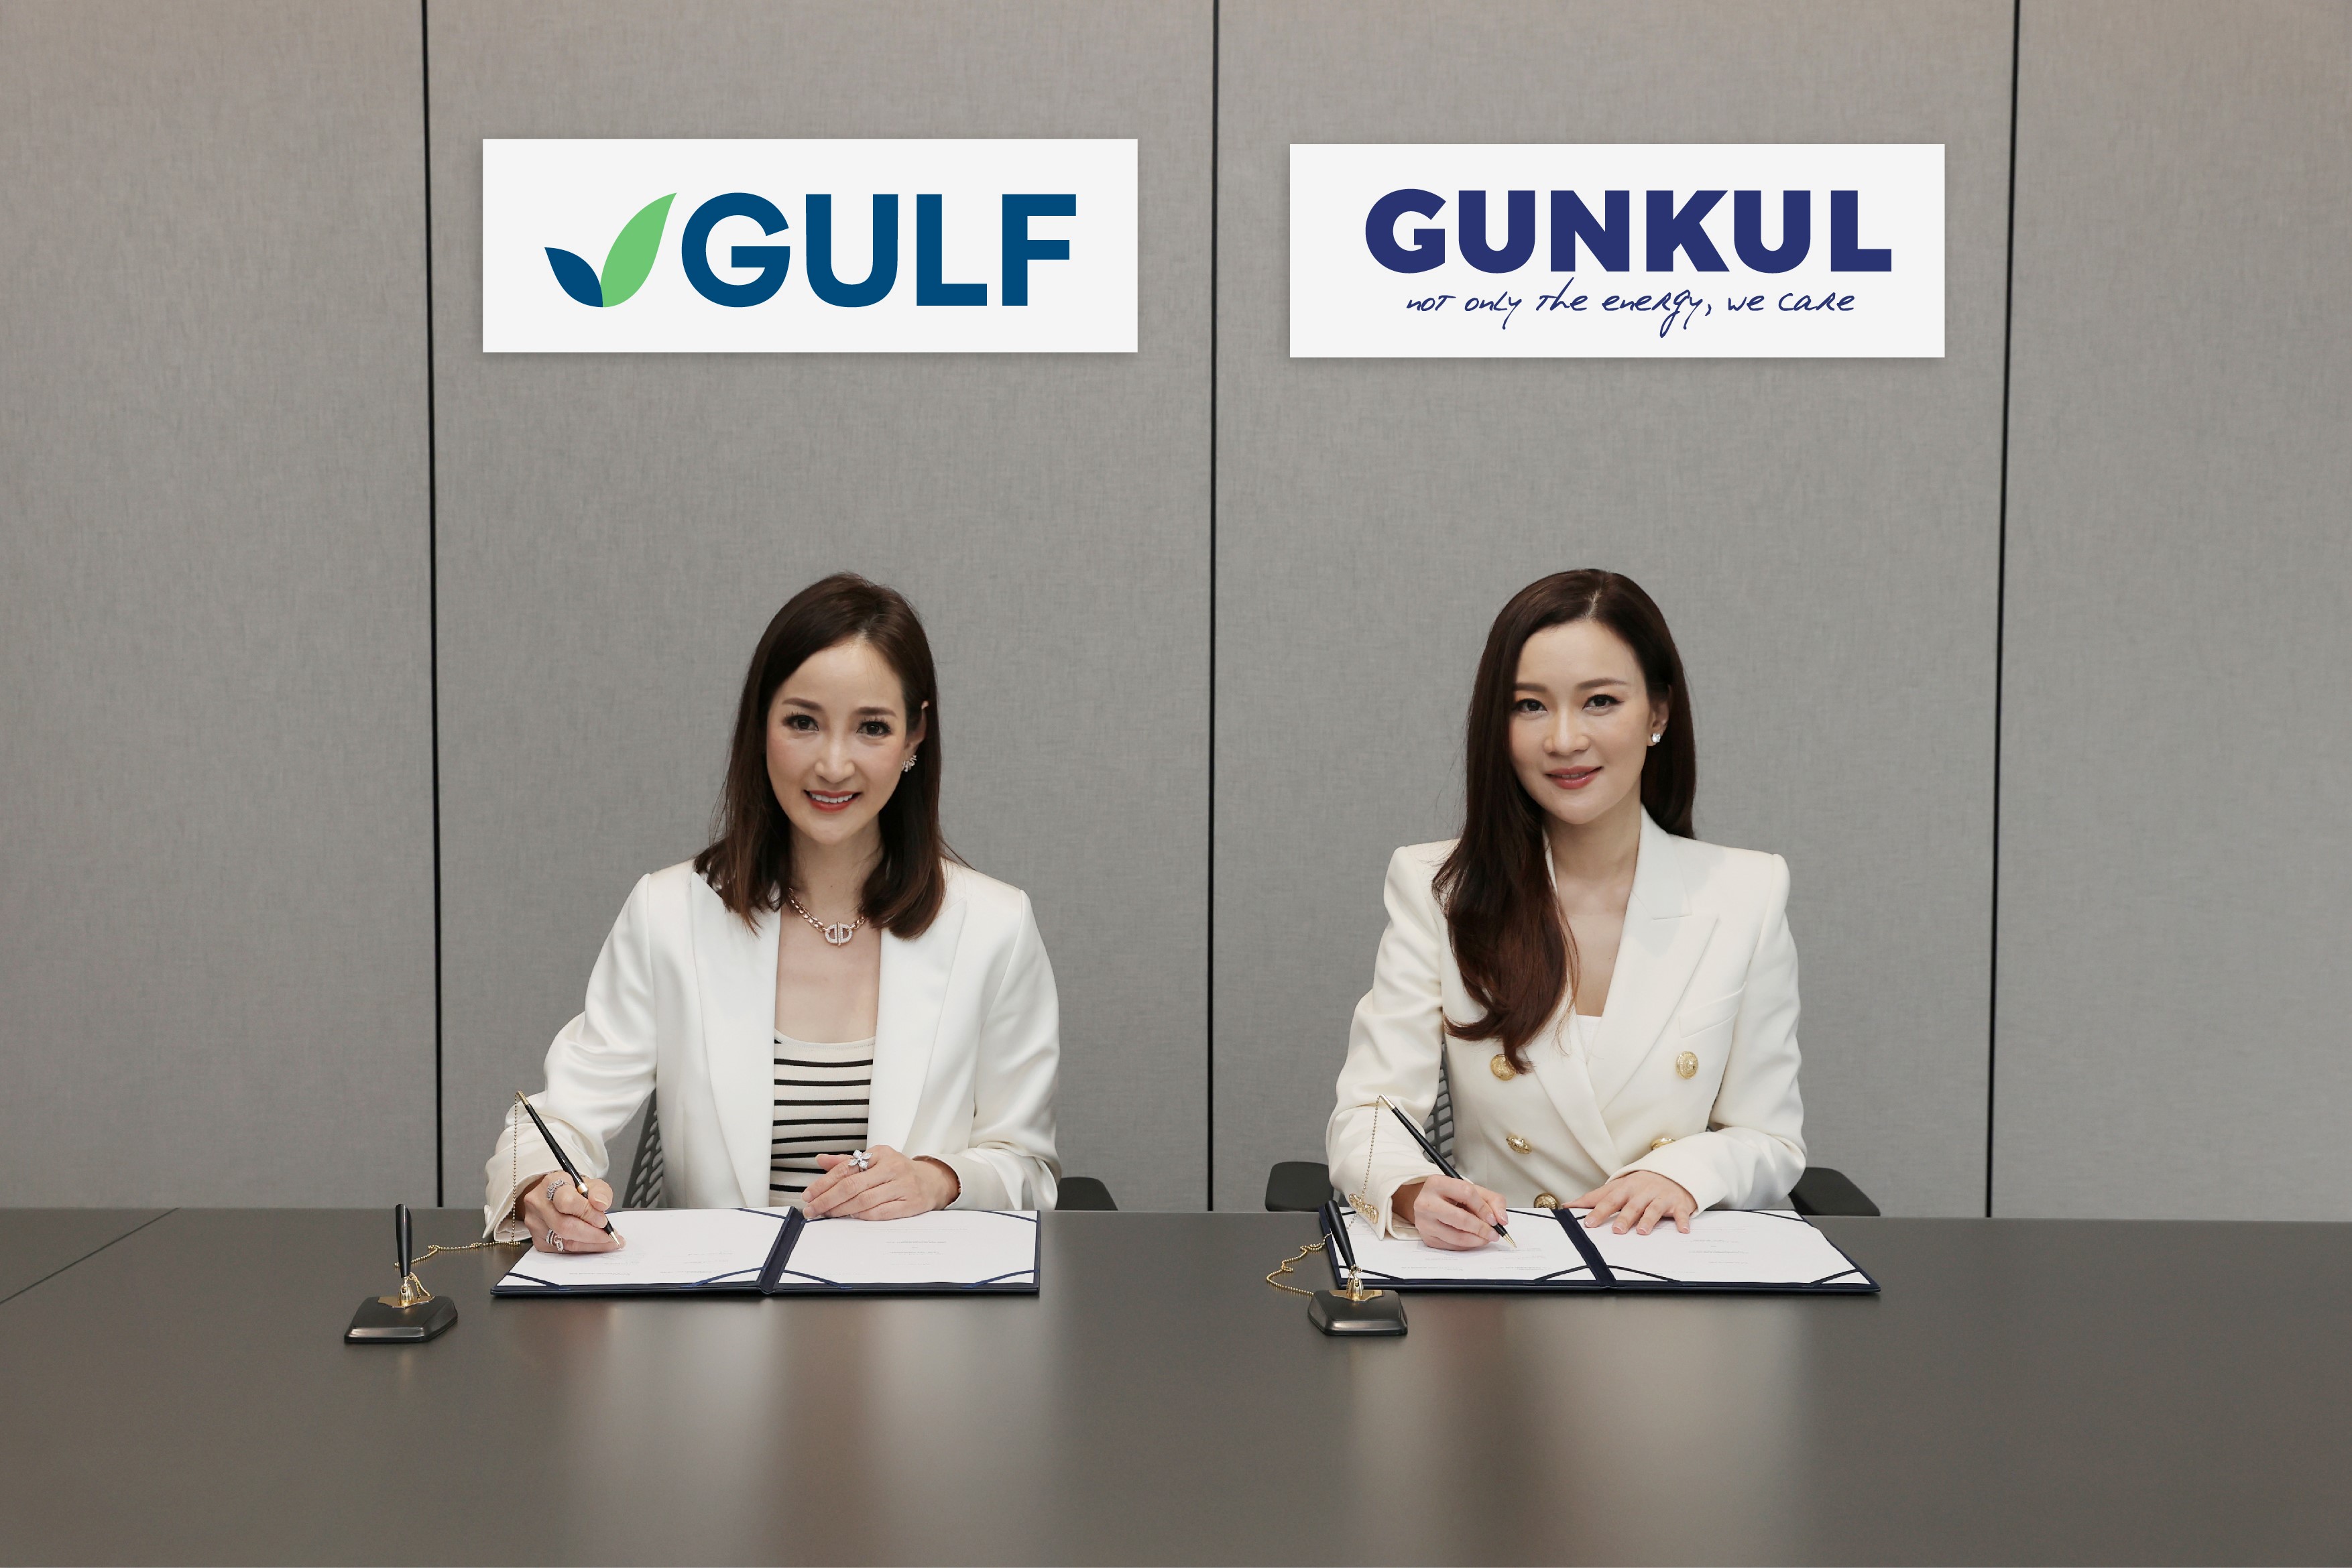 GULF joins forces with GUNKUL to jointly develop 1,000 MW of renewable energy 
within 5 years.